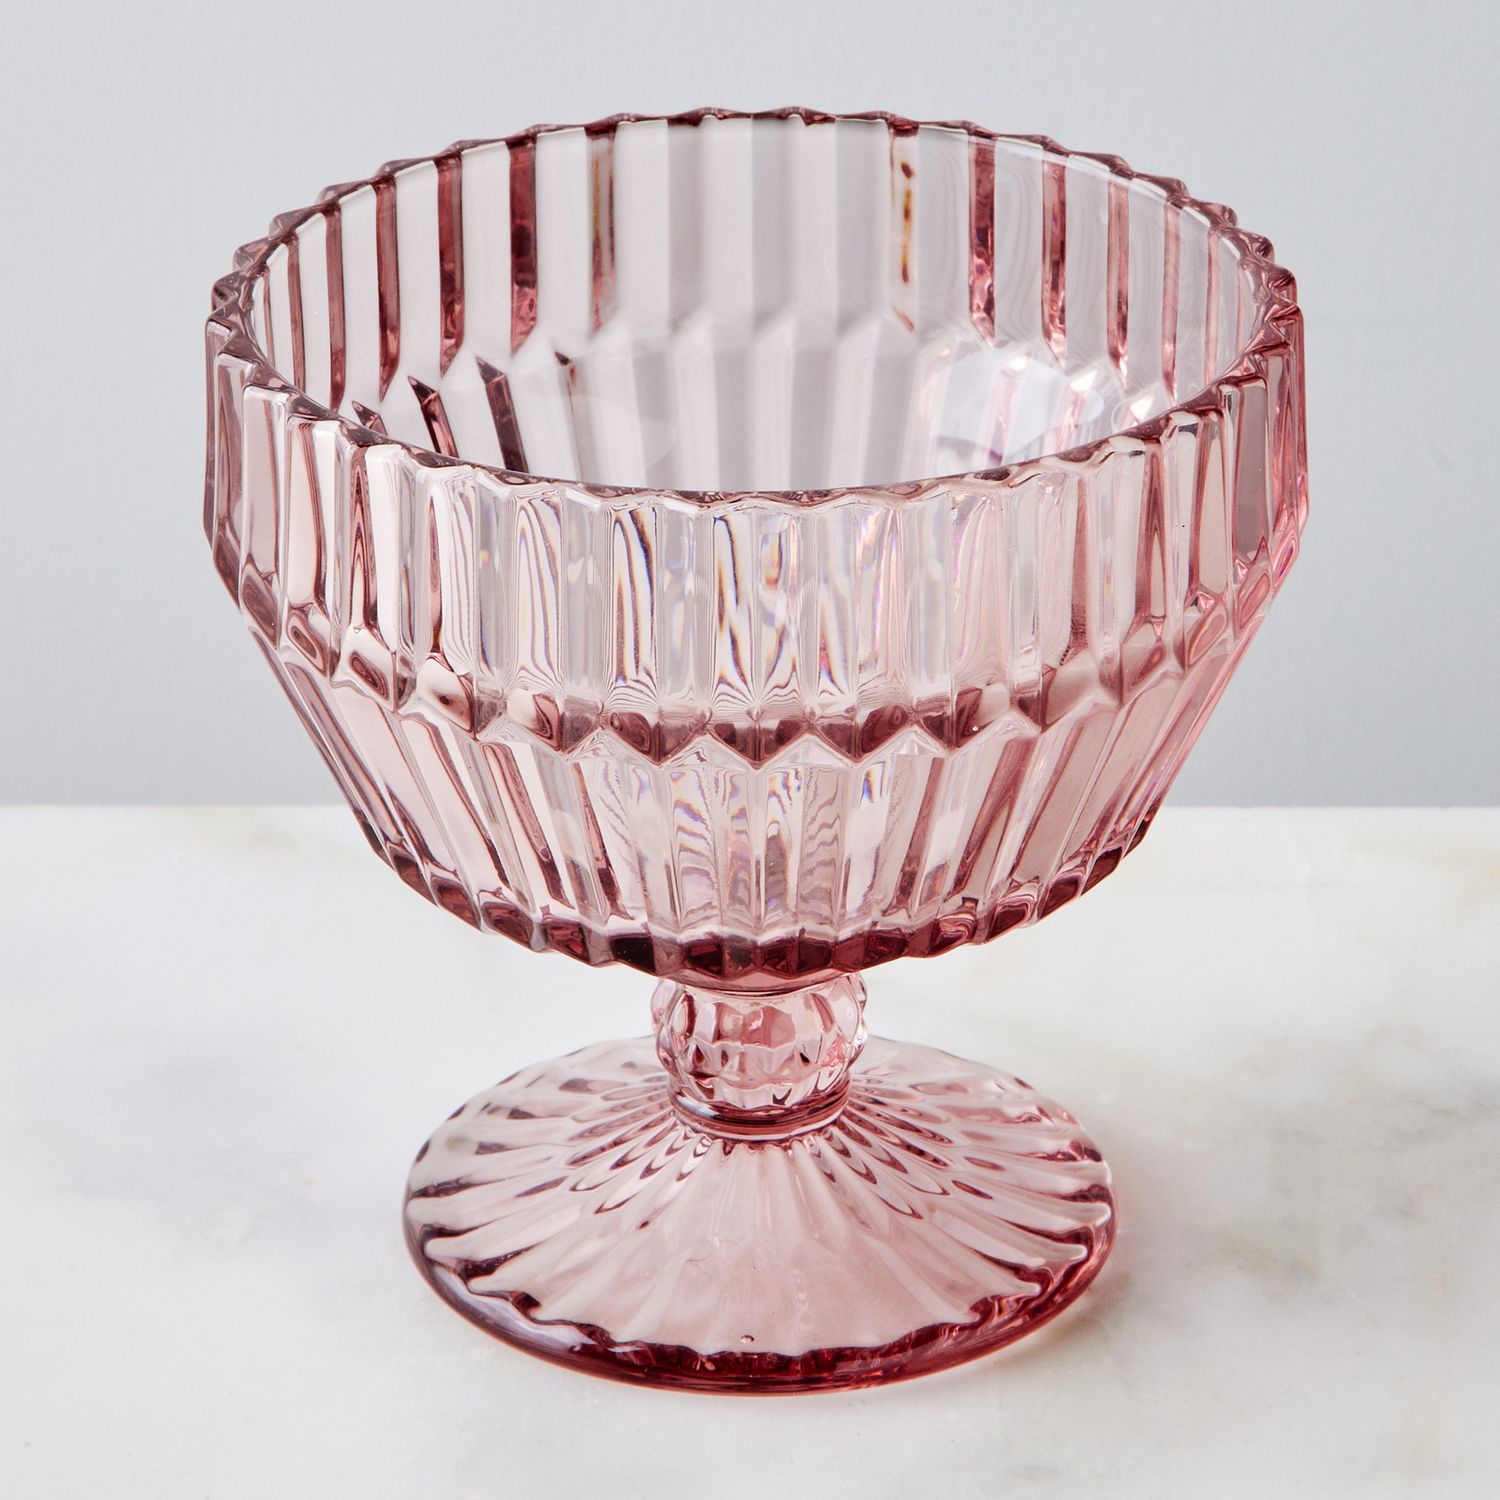 Archie Glass Dessert Coupes (Set of 6) | Food52